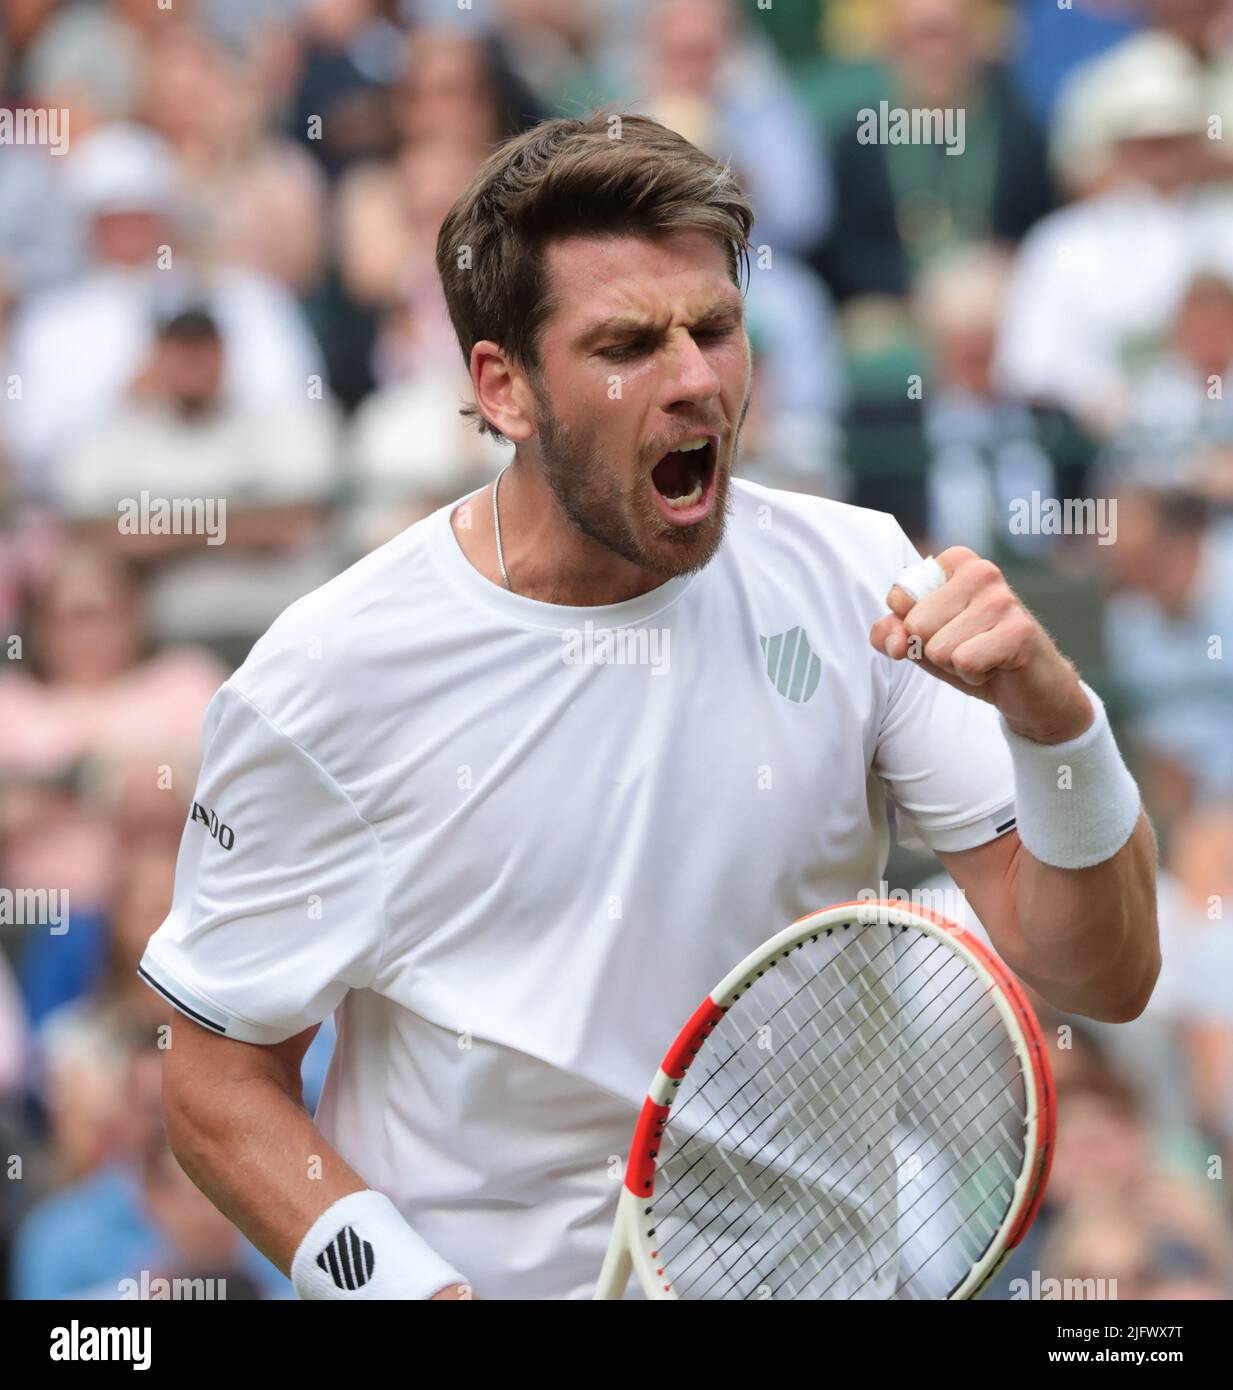 London, UK. 05th July, 2022. Great Britain's Cameron Norrie celebrates during his Quarter-Final match against Belgian David Goffin on day nine of the 2022 Wimbledon championships in London onTuesday, July 05, 2022. Norrie won the match 3-6, 7-5, 2-6, 6-3, 7-5. Photo by Hugo Philpott/UPI Credit: UPI/Alamy Live News Stock Photo